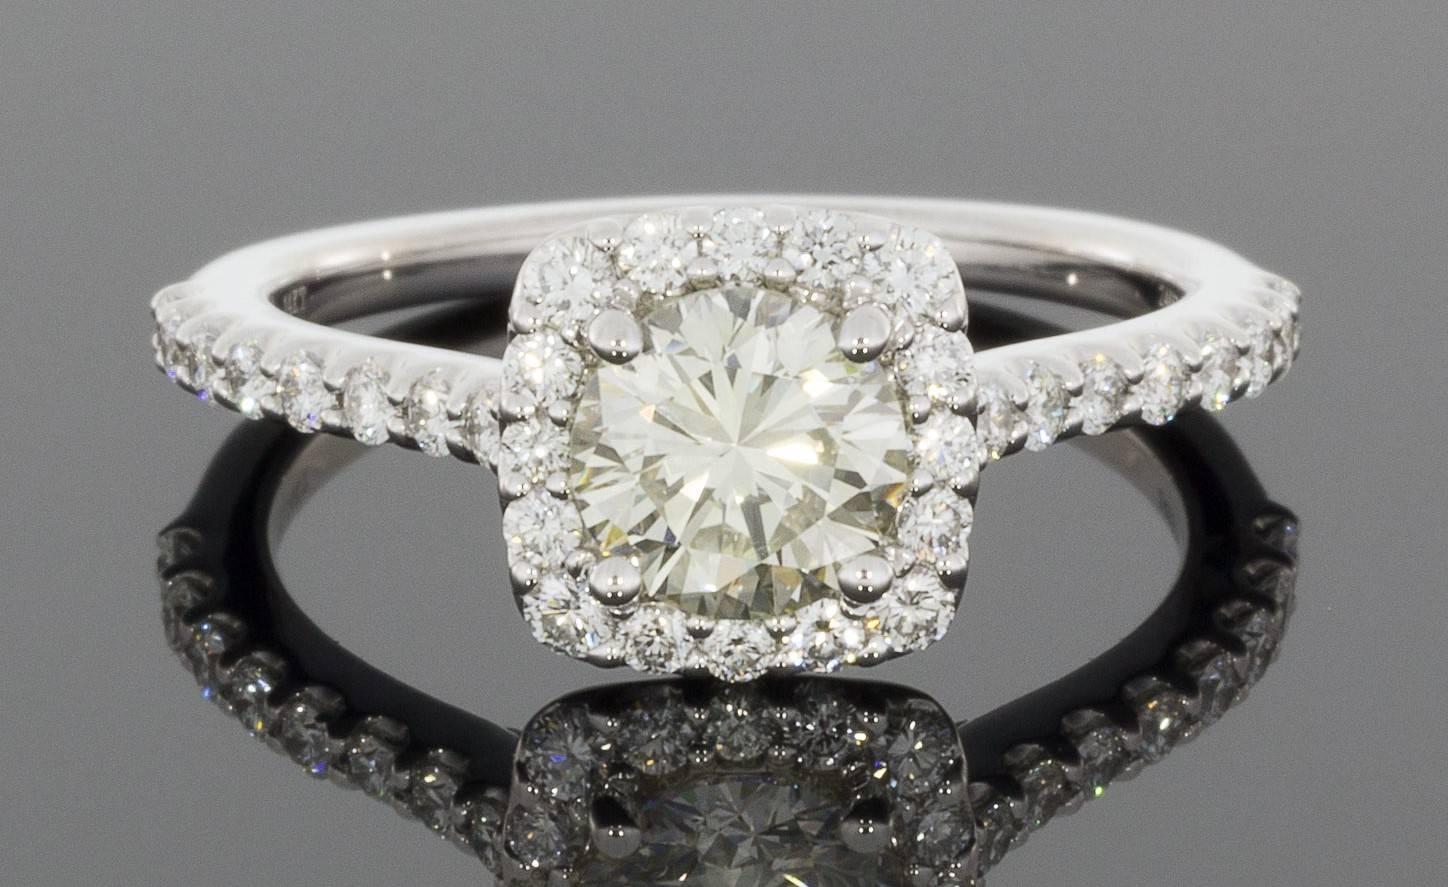 This beautiful halo diamond engagement ring is from the designer Ritani, one of the most recognized designers in the world. Ritani engagement rings feature the world's most beautiful diamonds and gemstones, hand selected by in-house, certified